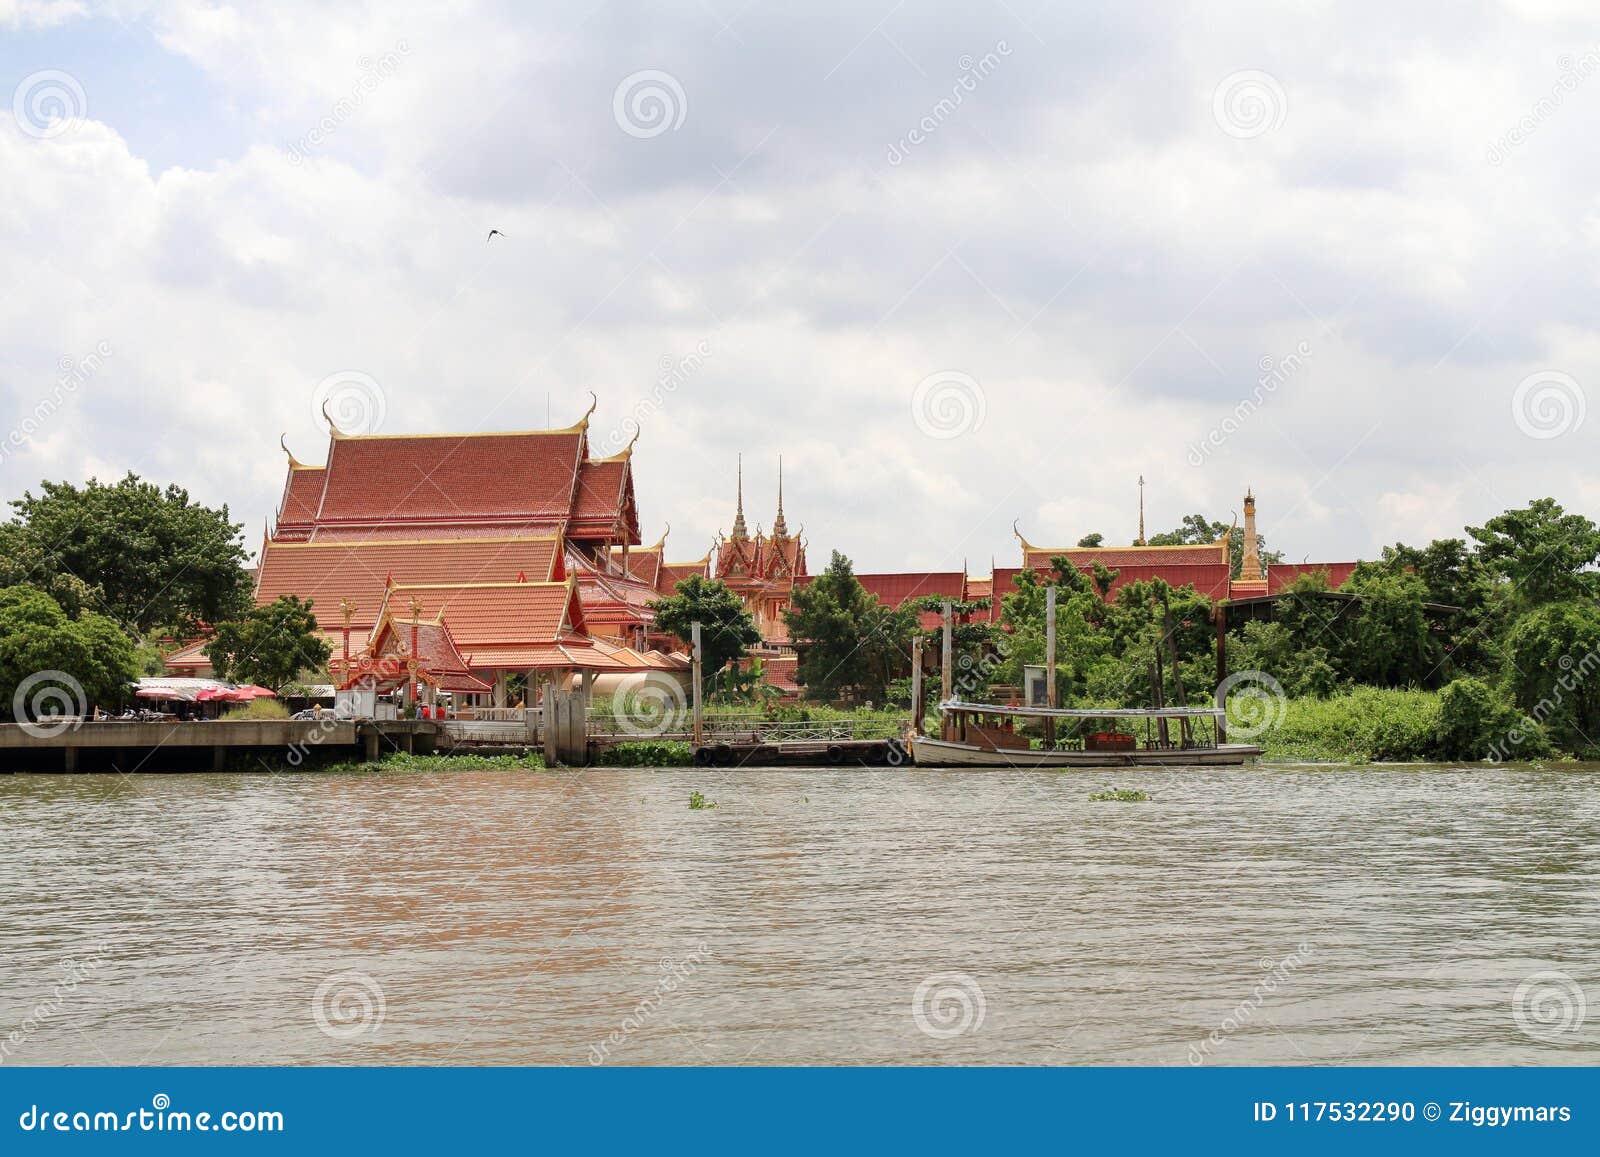 wat sanam nuea and chao phraya river, view from koh kret in bangkok